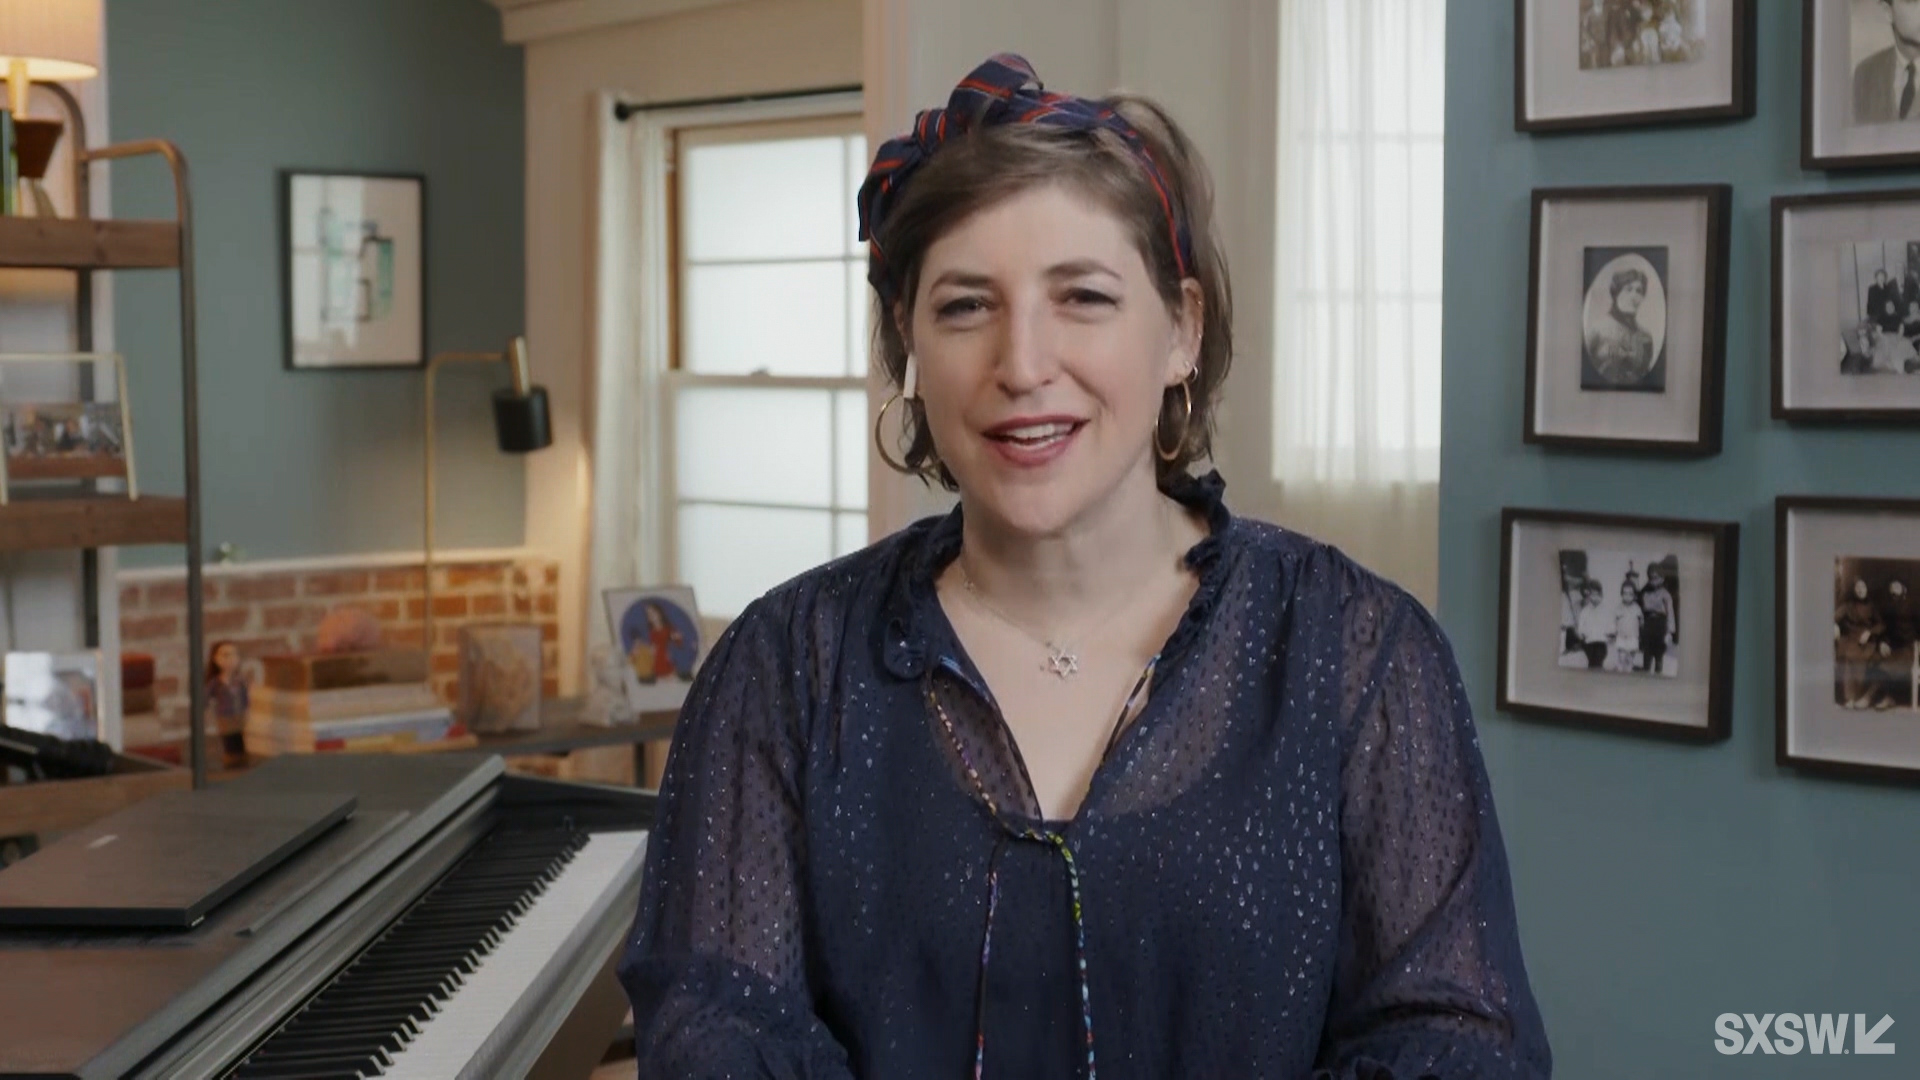 Mayim Bialik speaks at the featured session “Why Do We Fear Innovation?” during SXSW Online on March 17, 2021.